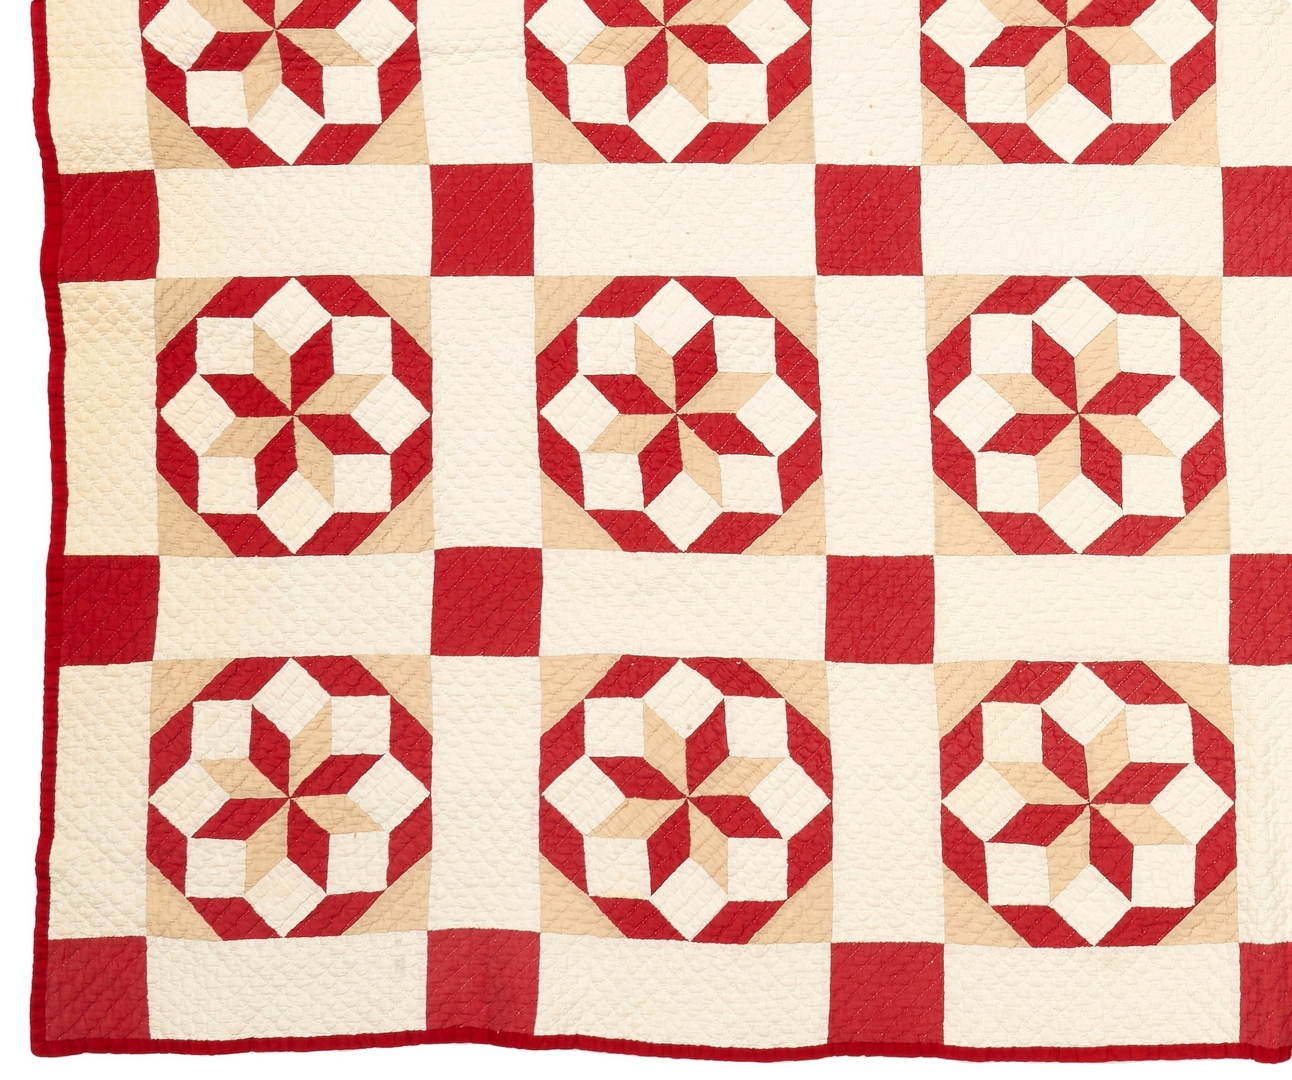 Lot 874: 3 Southern/East TN Pieced Cotton Quilts, incl. Whig Rose